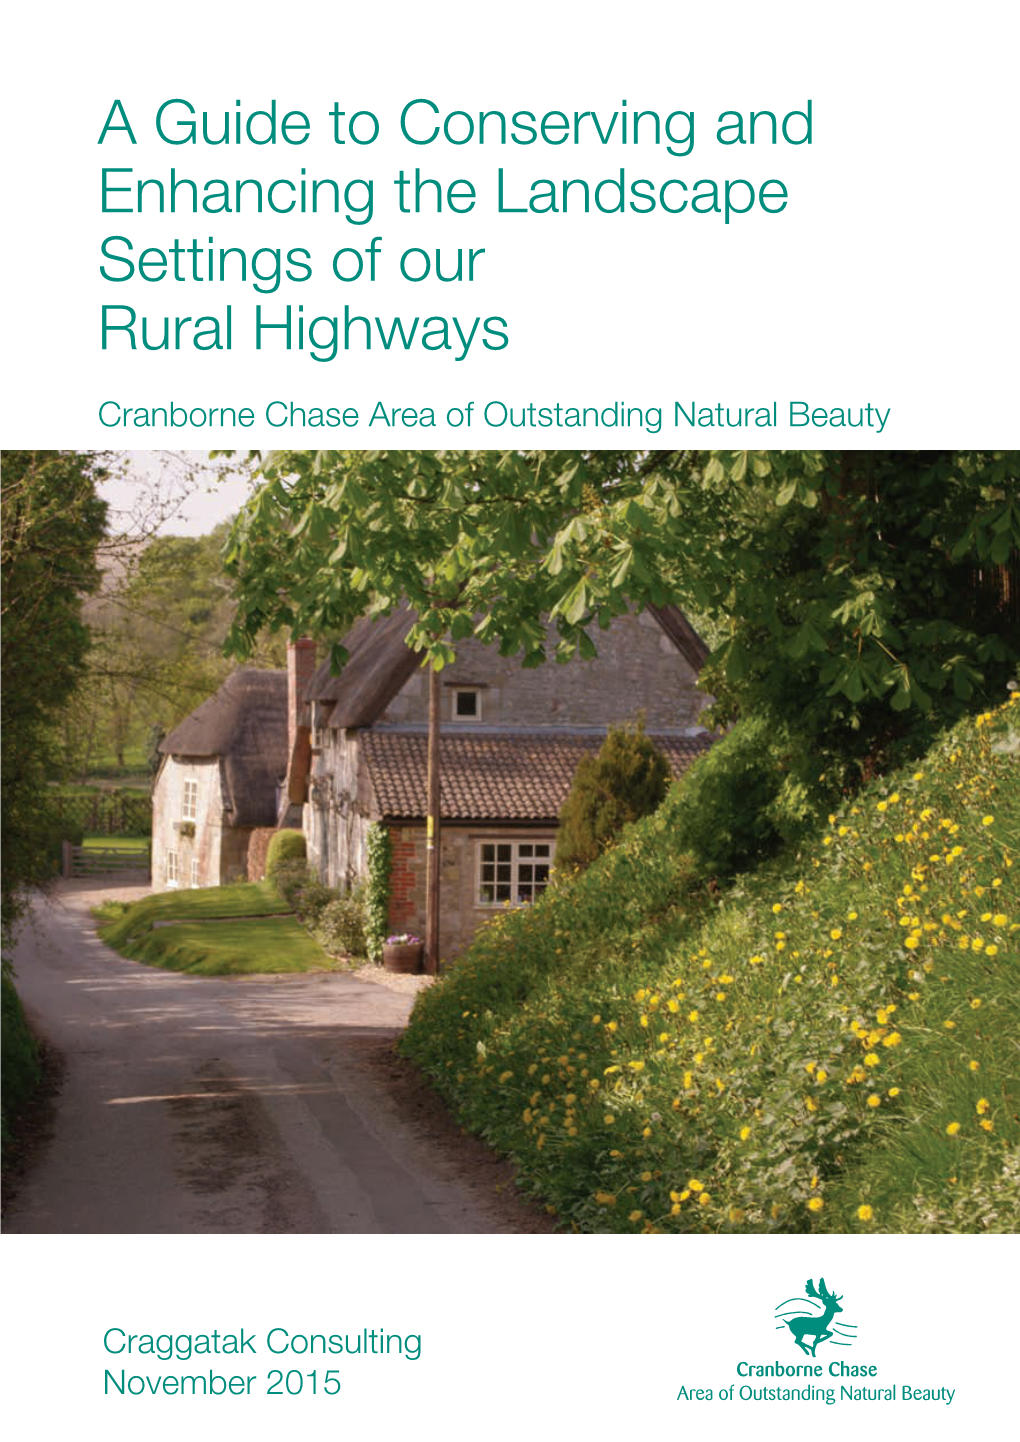 A Guide to Conserving and Enhancing the Landscape Settings of Our Rural Highways